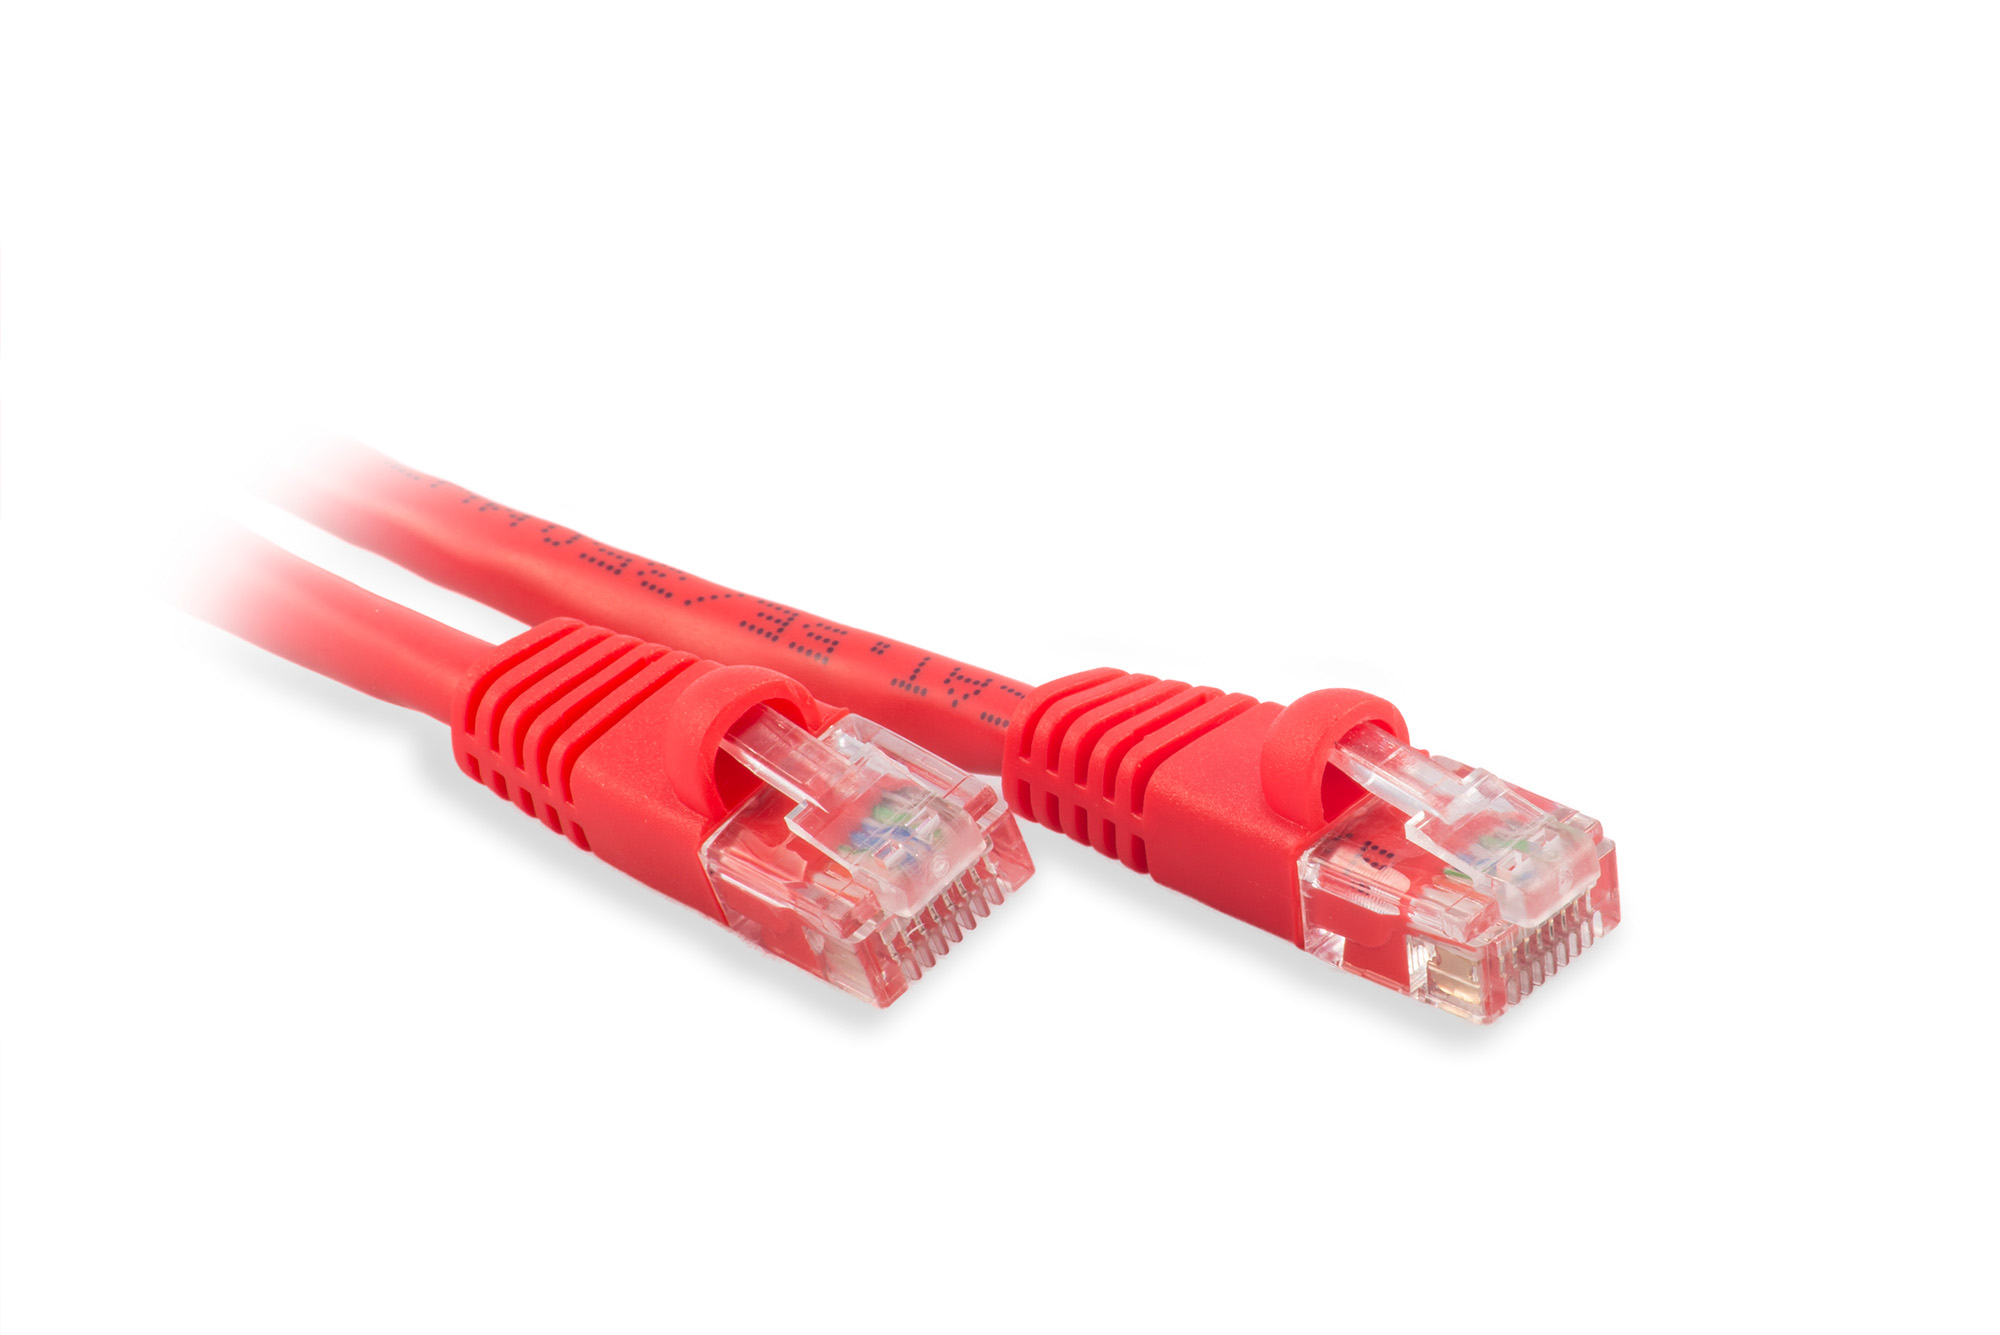 5ft Cat6 Ethernet Patch Cable - Red Color - Snagless Boot, Stranded, RJ45, 550Mhz, 24AWG